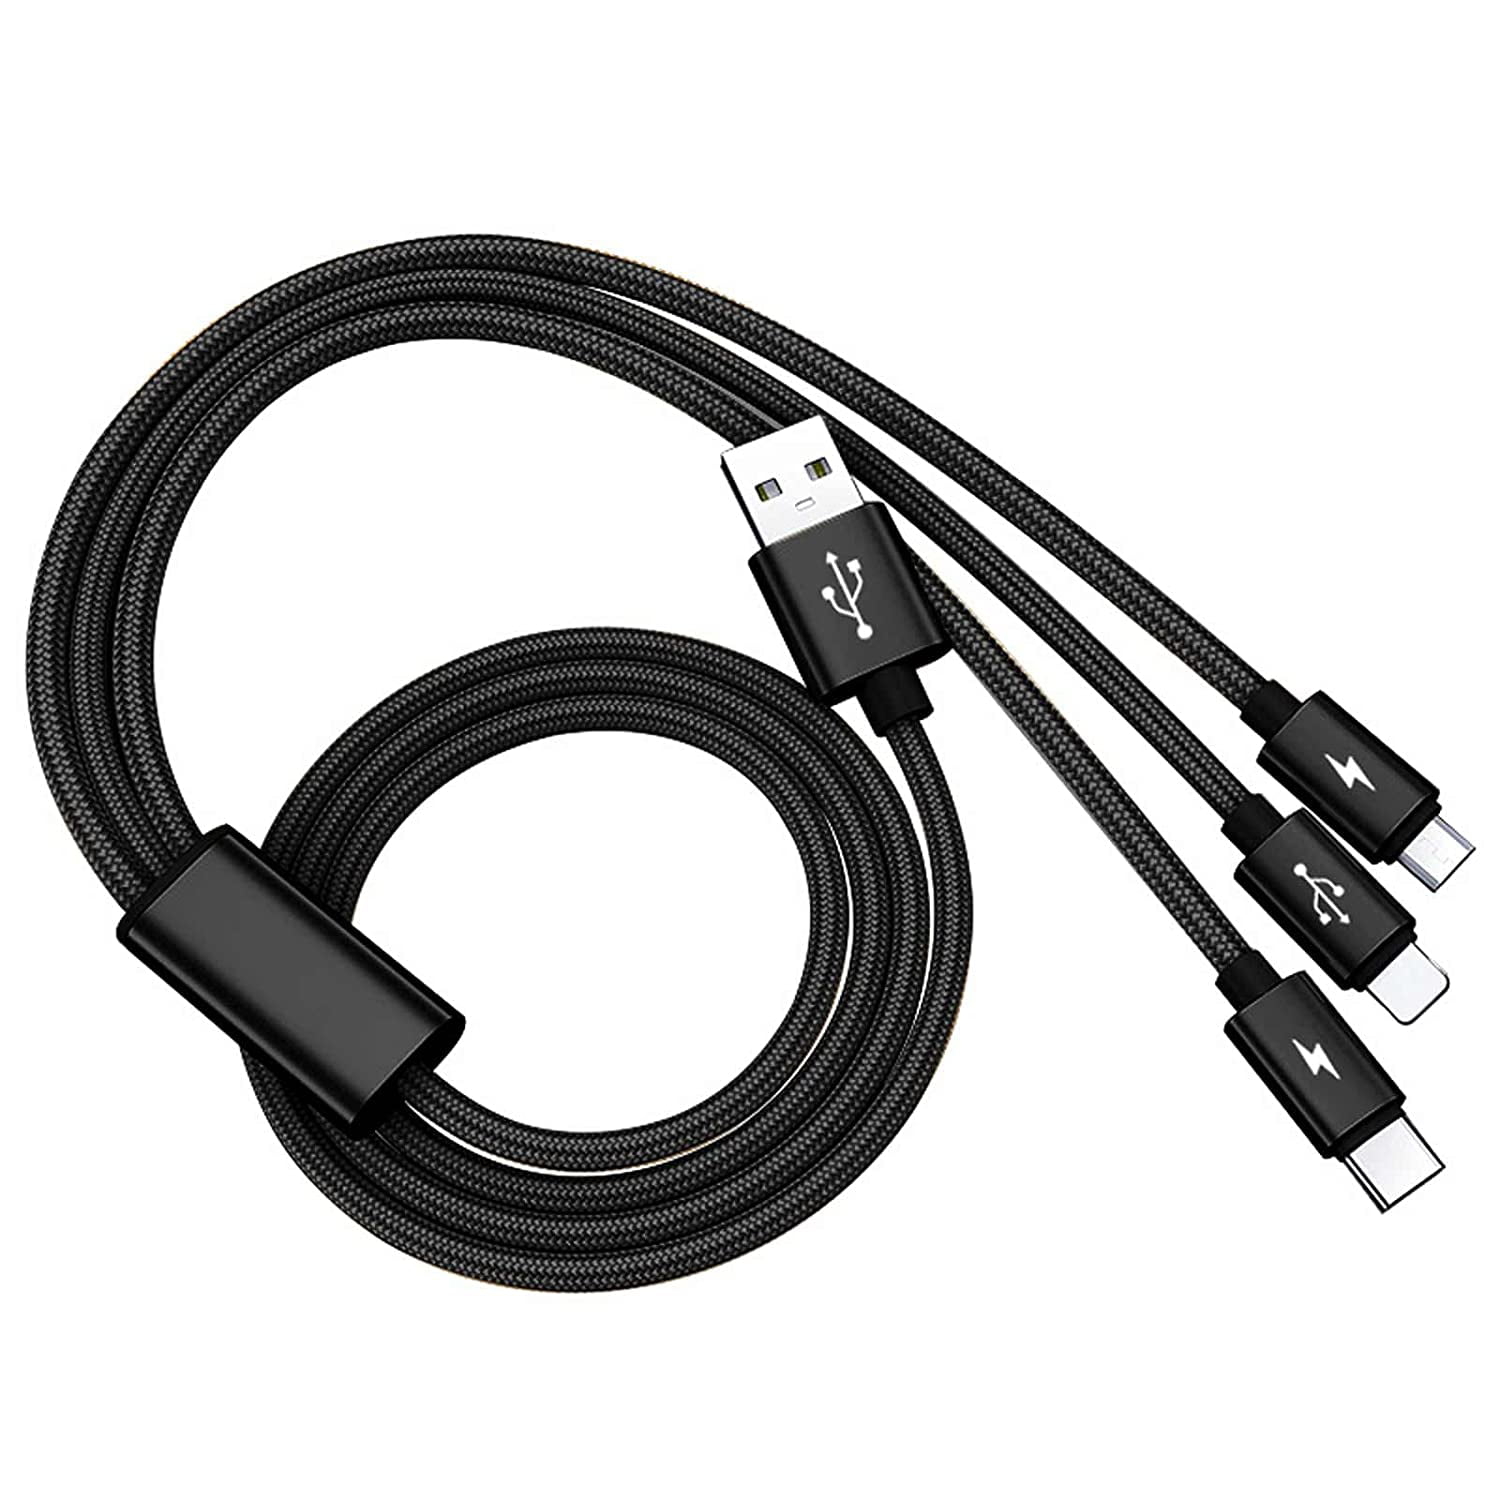 Olesit Charge Cables 3FT 10FT Fast Charging Pd Micro Type C Data Cable For  Samsung With Retail From Beest, $0.86